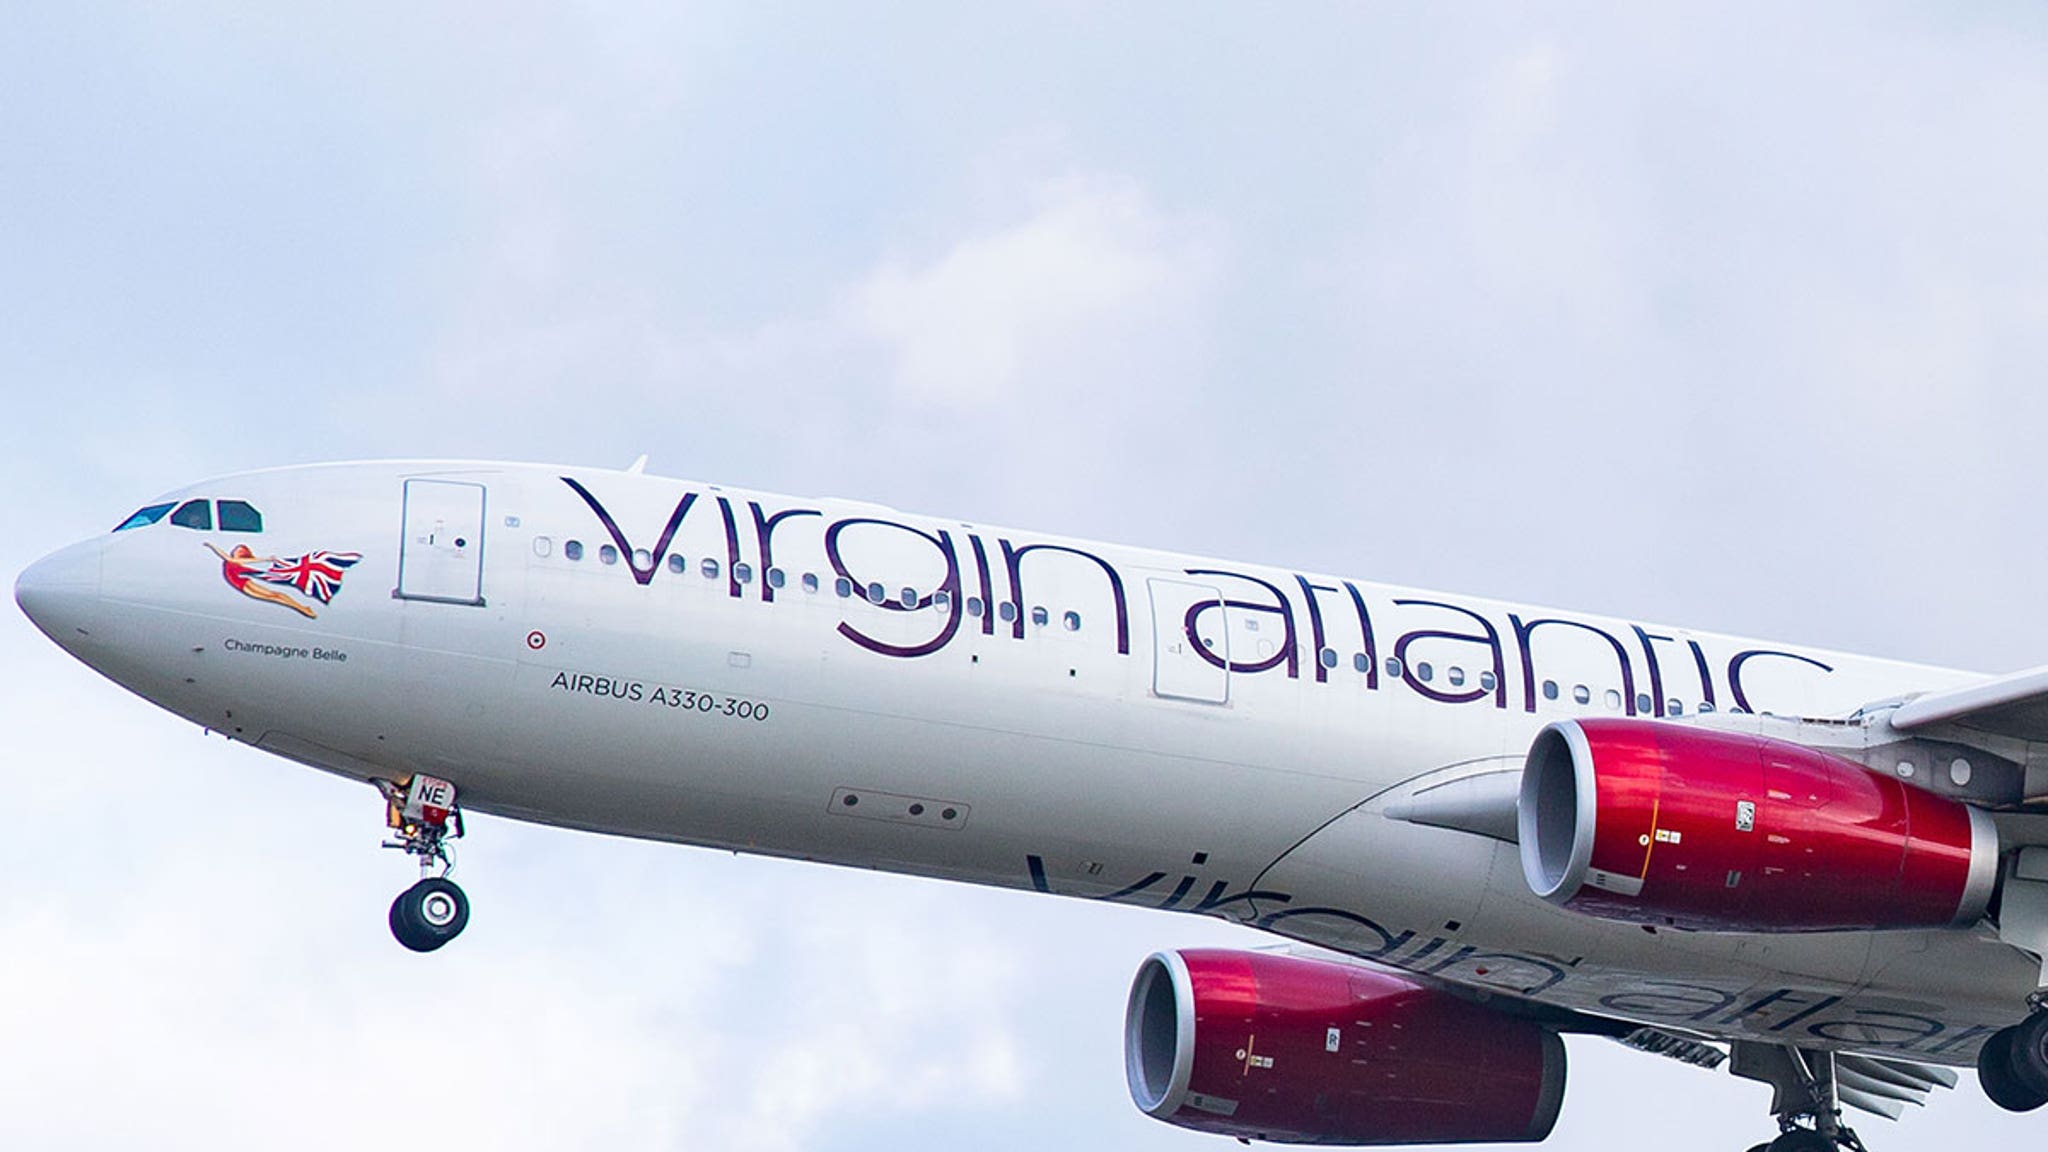 Virgin Atlantic Jet Turns Back After Pilot Reveals He's Unqualified to Fly